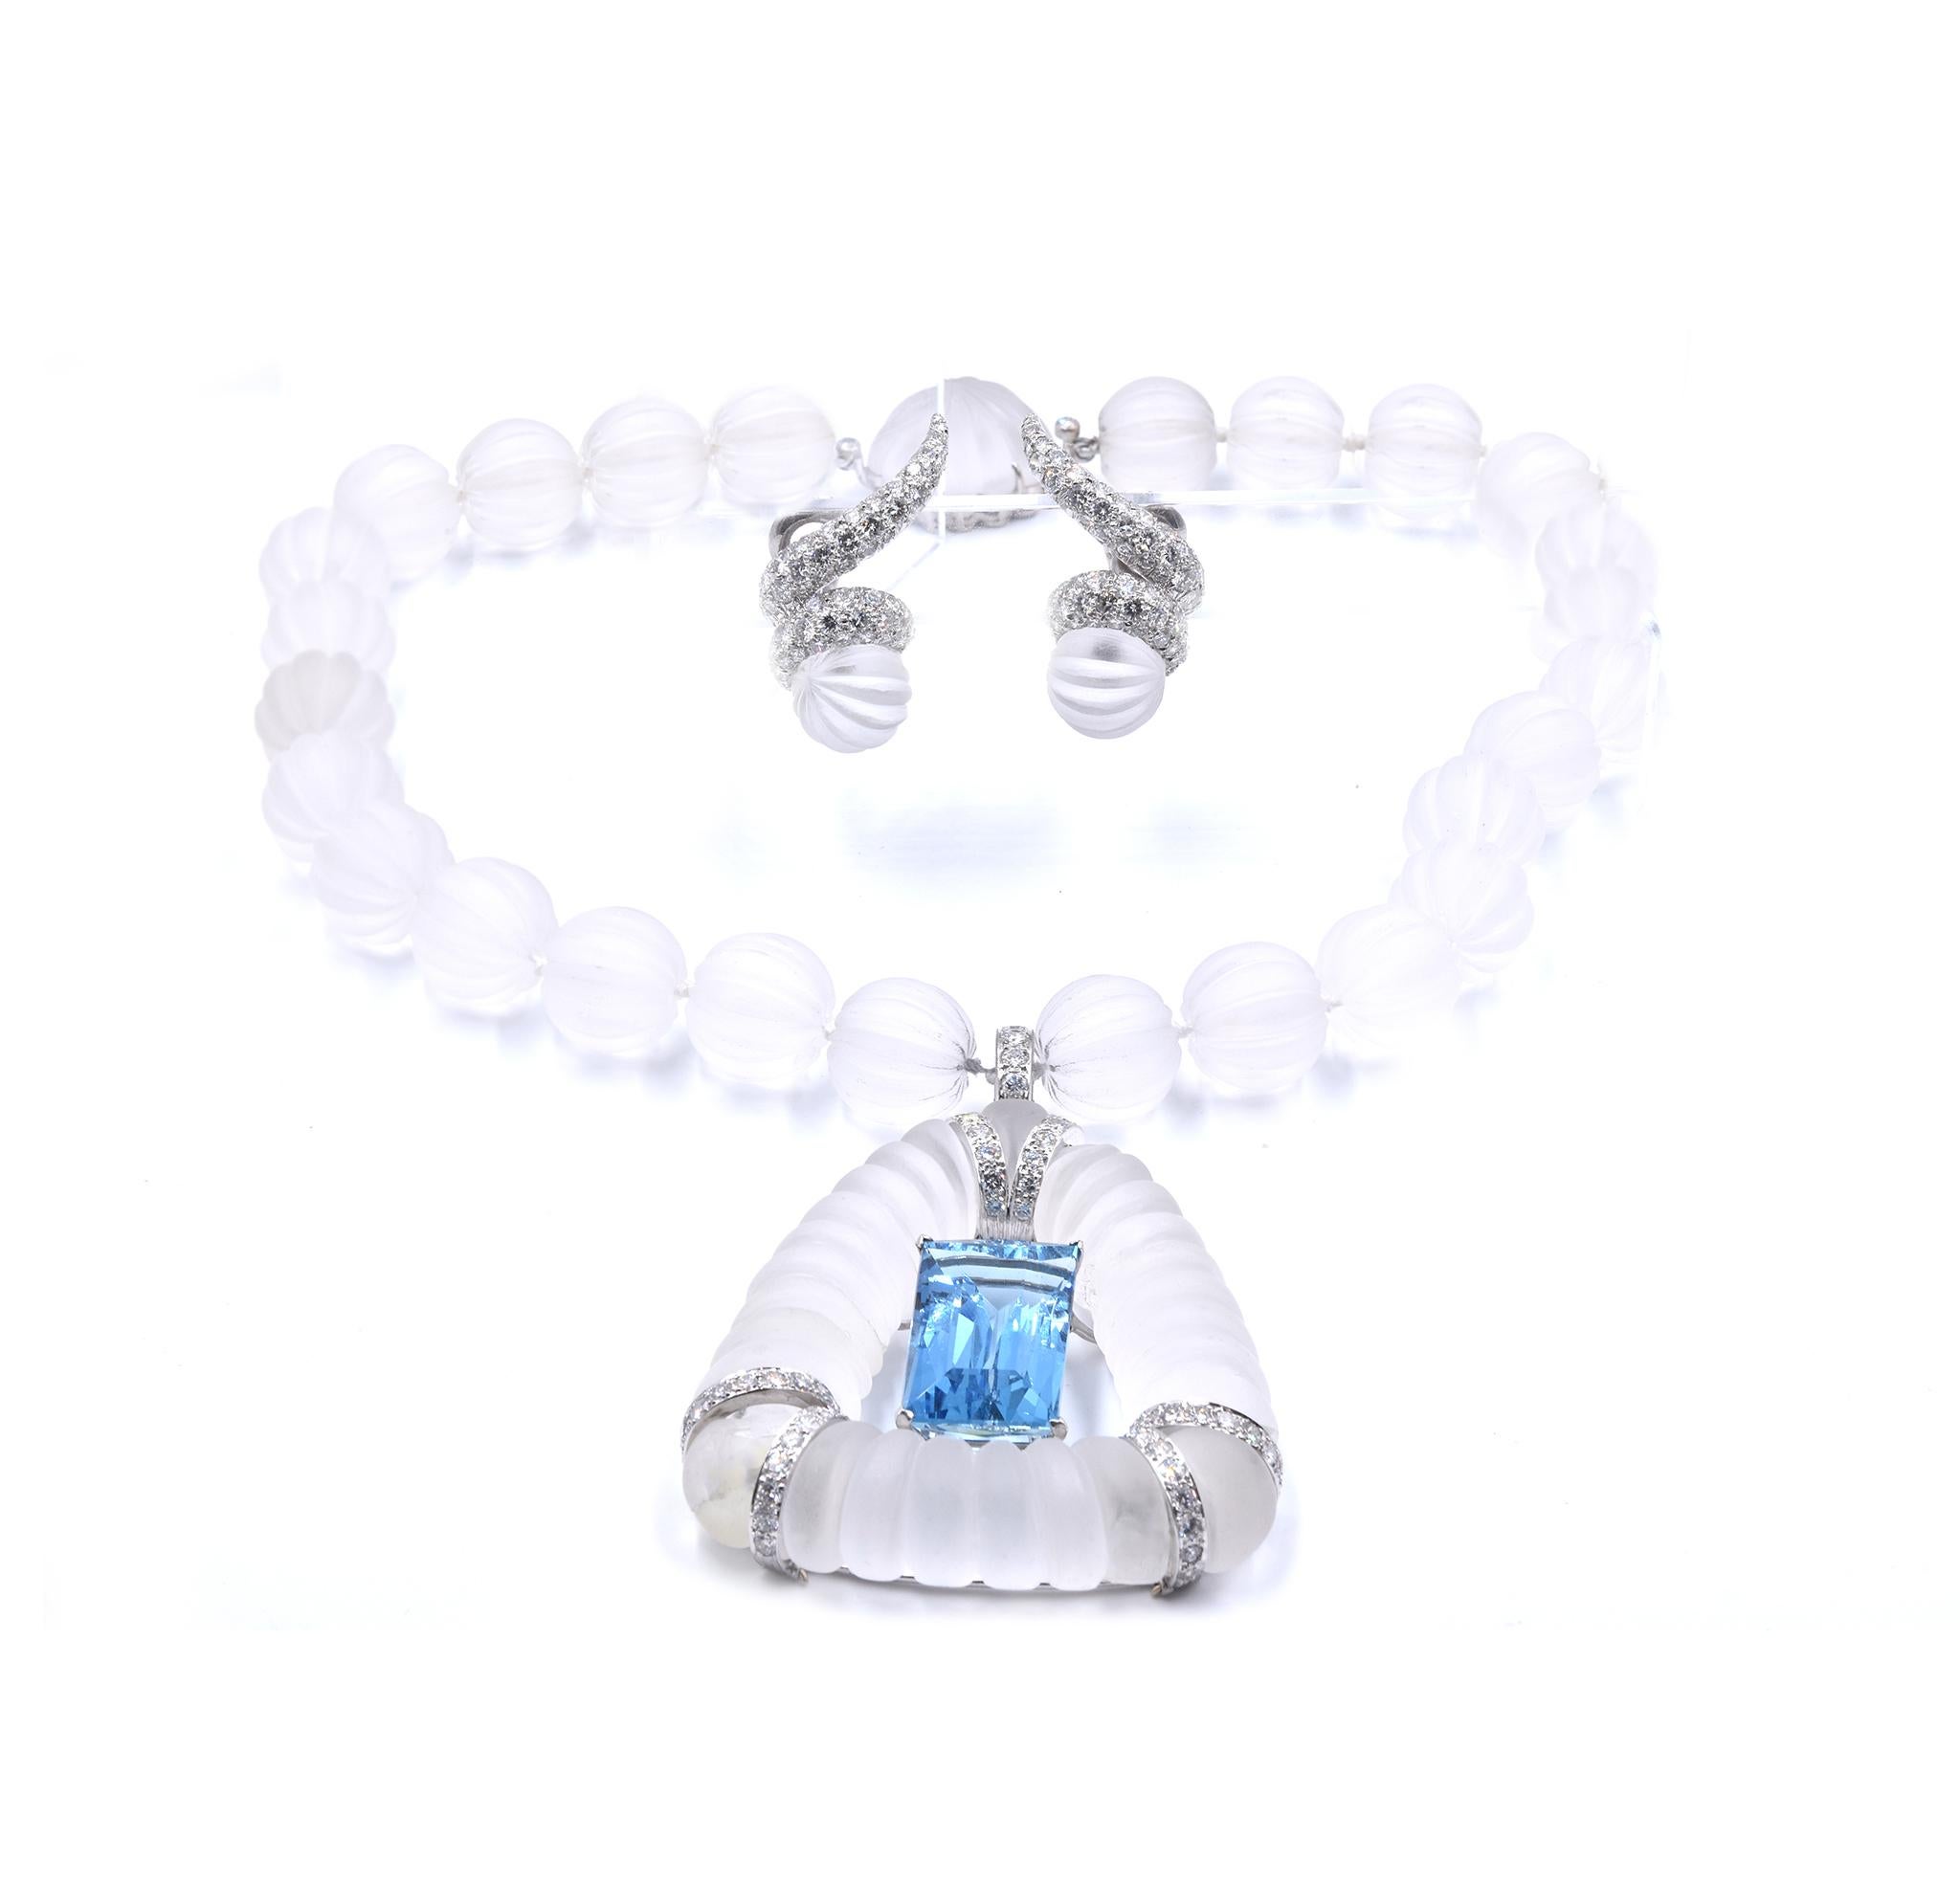 Material: 18K white gold / carved rock crystal
Diamond: 168 round brilliant cut = 4.00cttw
Color: G
Clarity: VS2
Aquamarine: 1 emerald cut = 25.00ct
Dimensions: necklace measures 16-inches
Weight: 206.36 grams
